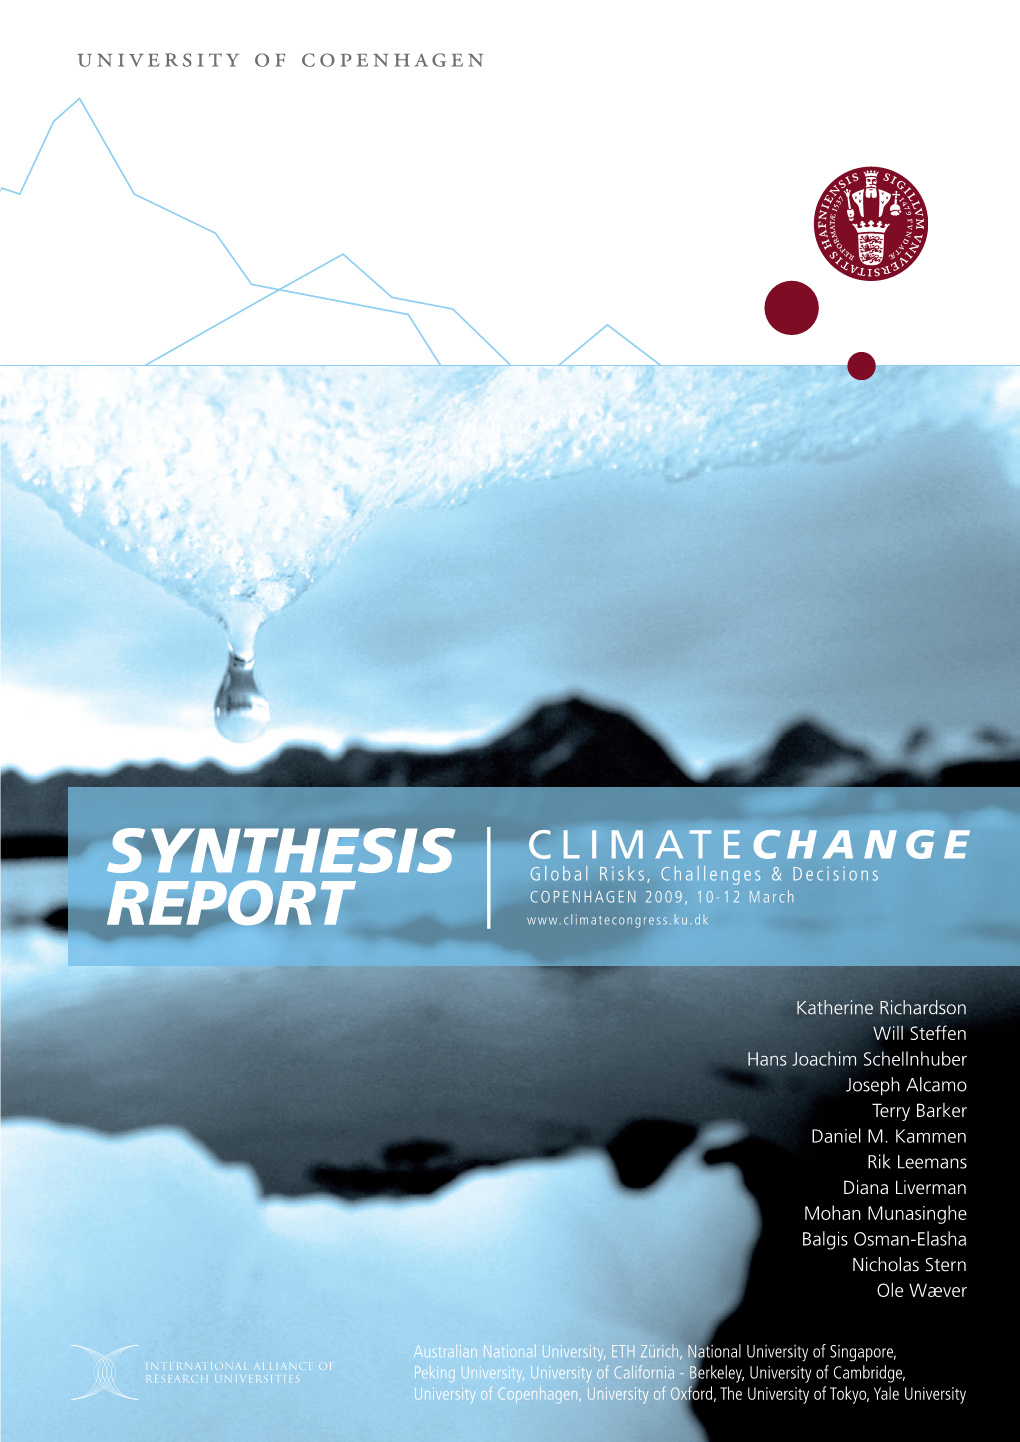 SYNTHESIS REPORT from C LIMATECHANGE Global Risks, Challenges & Decisions COPENHAGEN 2009, 10-12 March WRITING TEAM